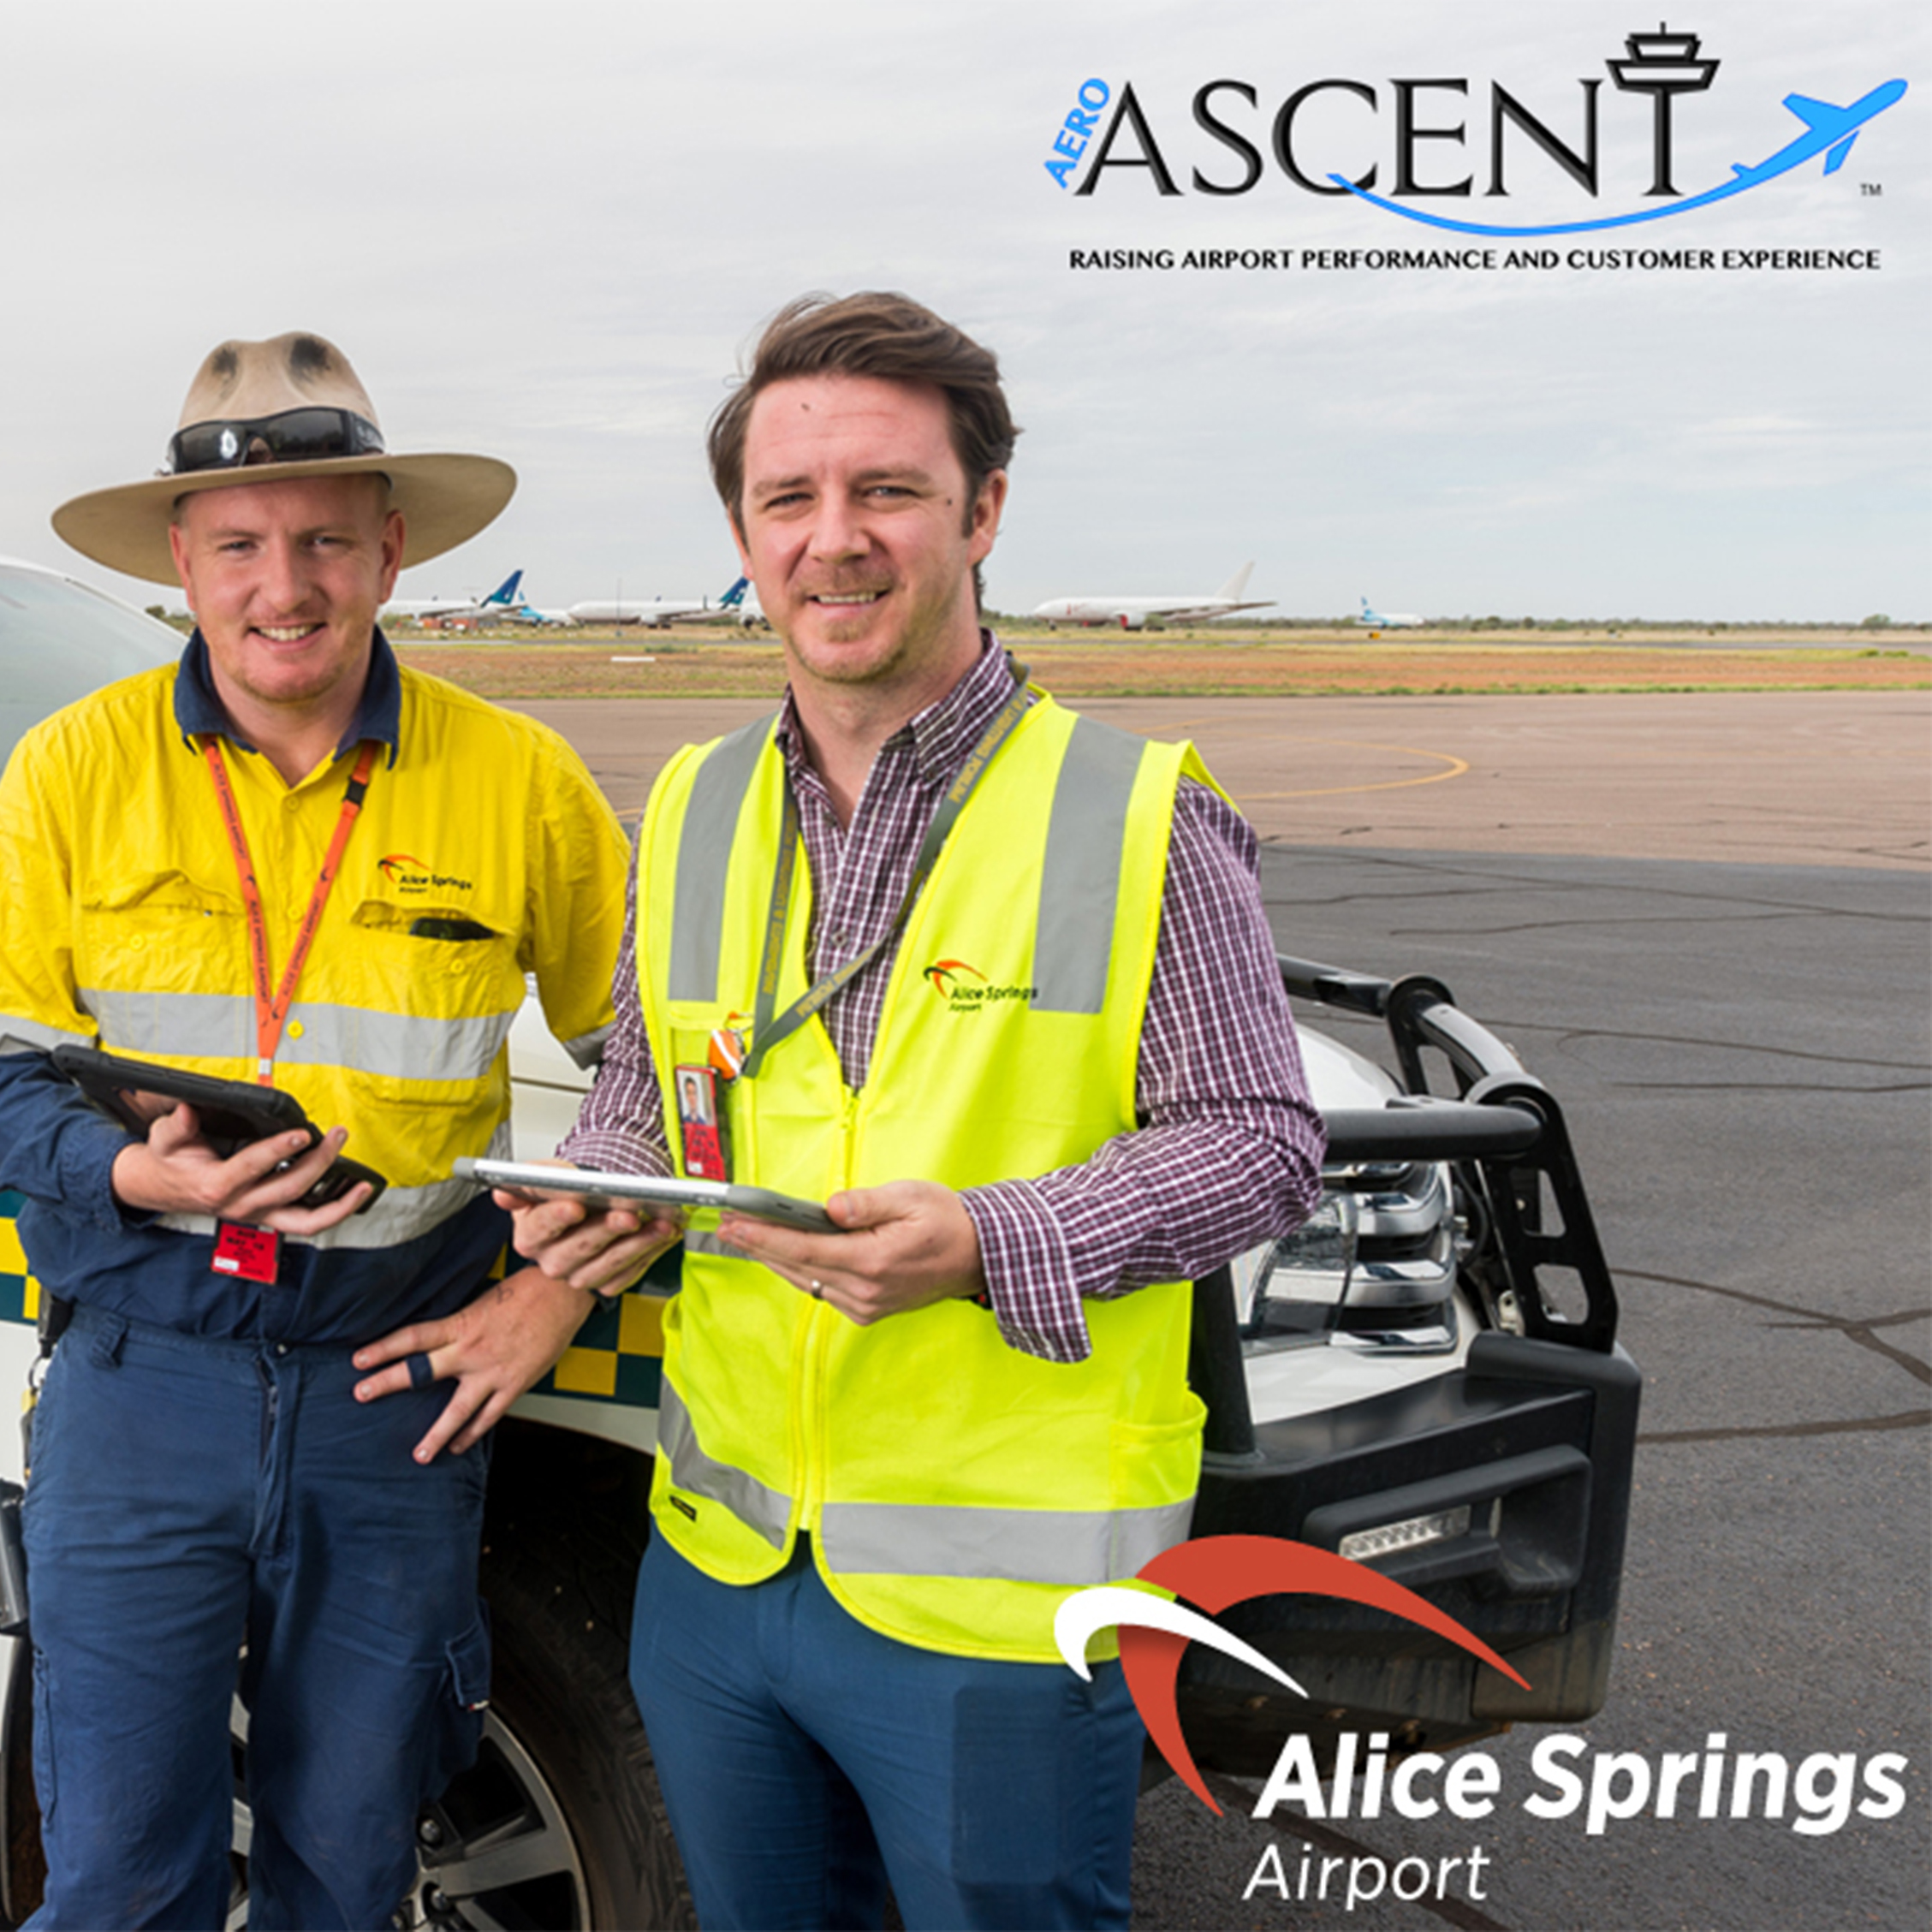 Davy Semal, Alice Springs Airport Manager Operations (right), with Reporting Officer, Shane Martyn, on the tarmac with the new AeroAscent TrackerAIRSIDE tracking technology that was launched on Monday.